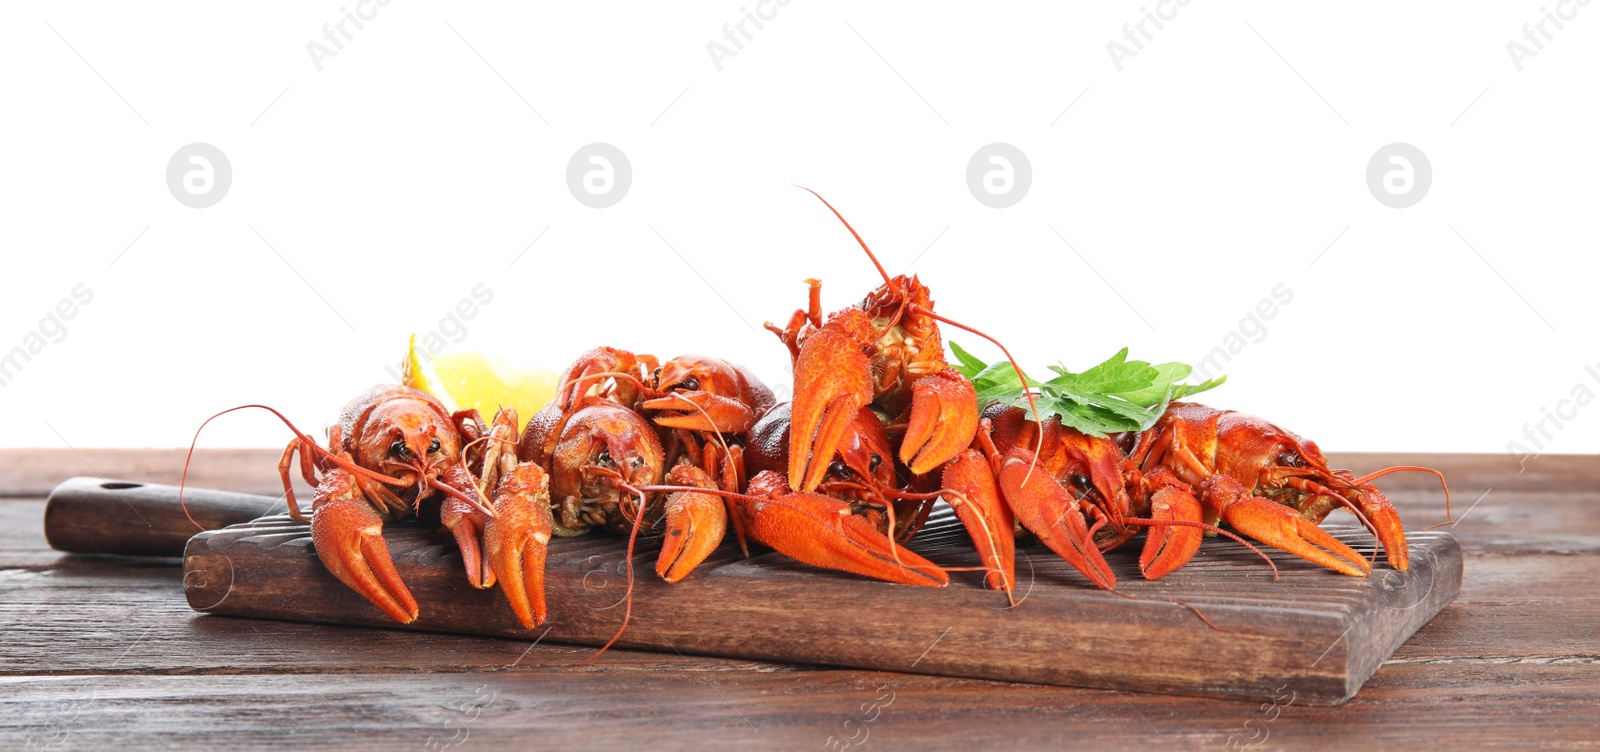 Photo of Delicious boiled crayfishes on wooden table against white background